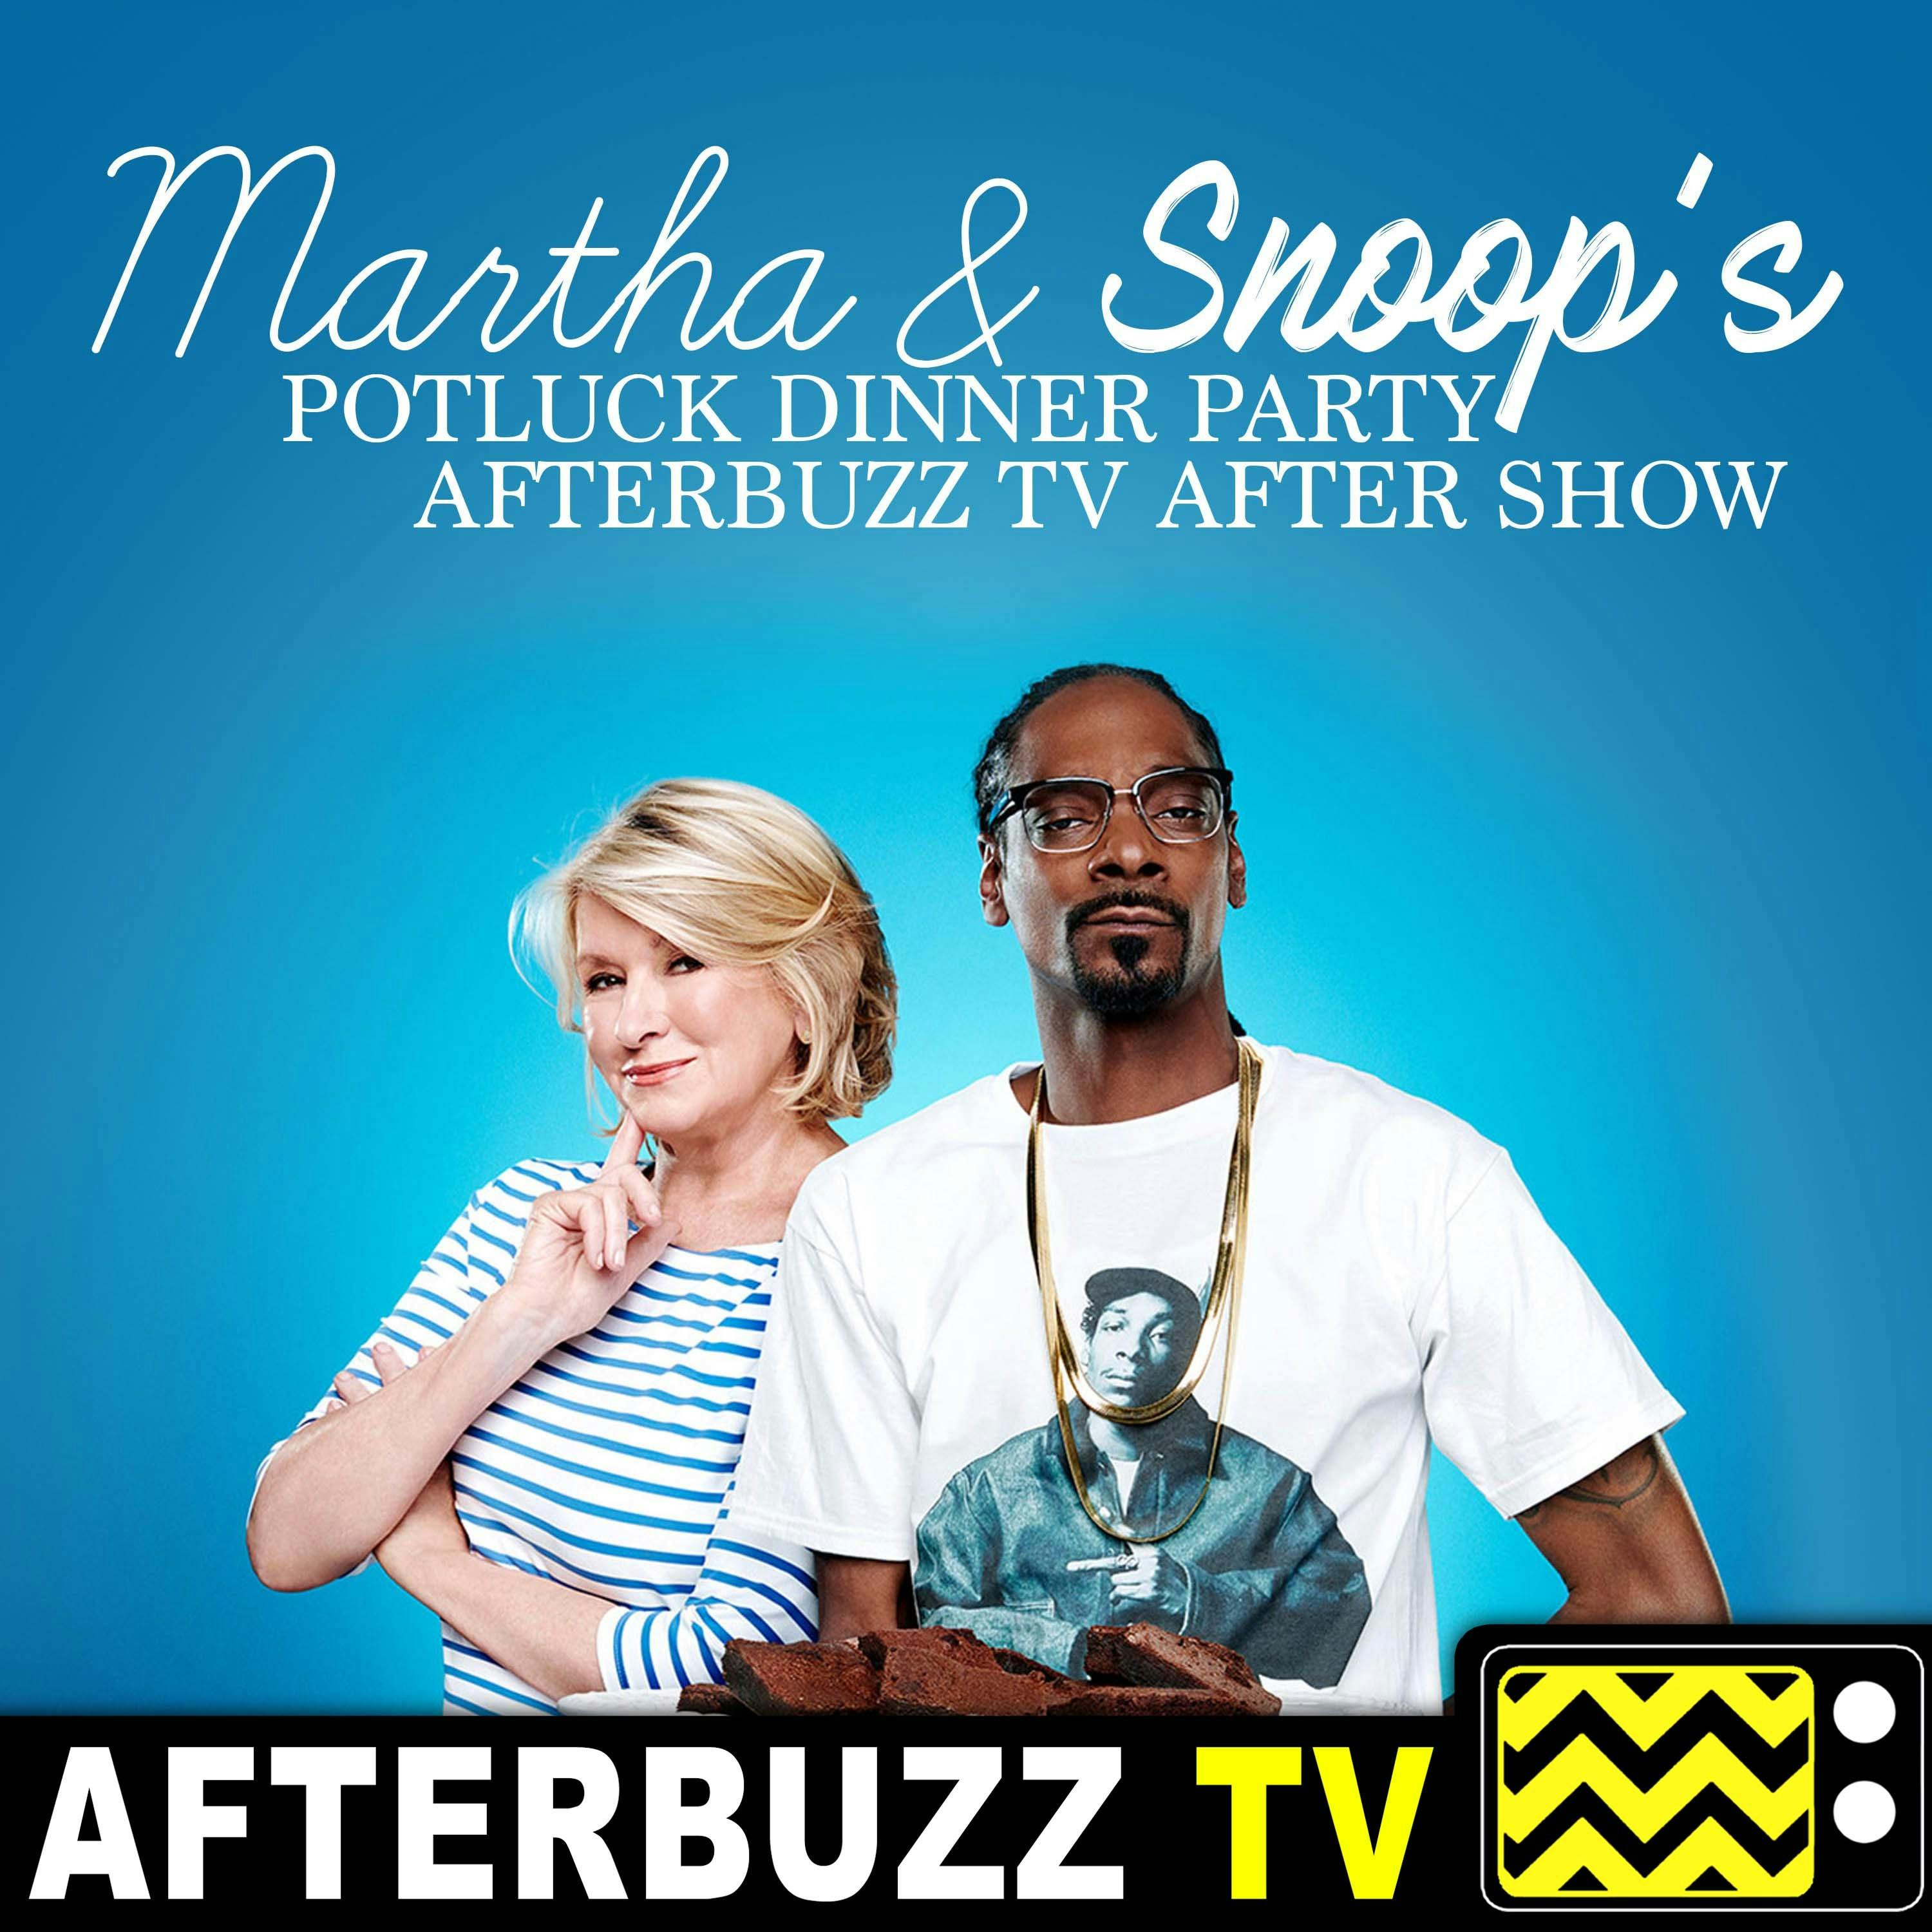 Martha Stewart & Snoop Dogg’s Potluck Dinner Party S:1 | Episode 6 & 7 | AfterBuzz TV AfterShow